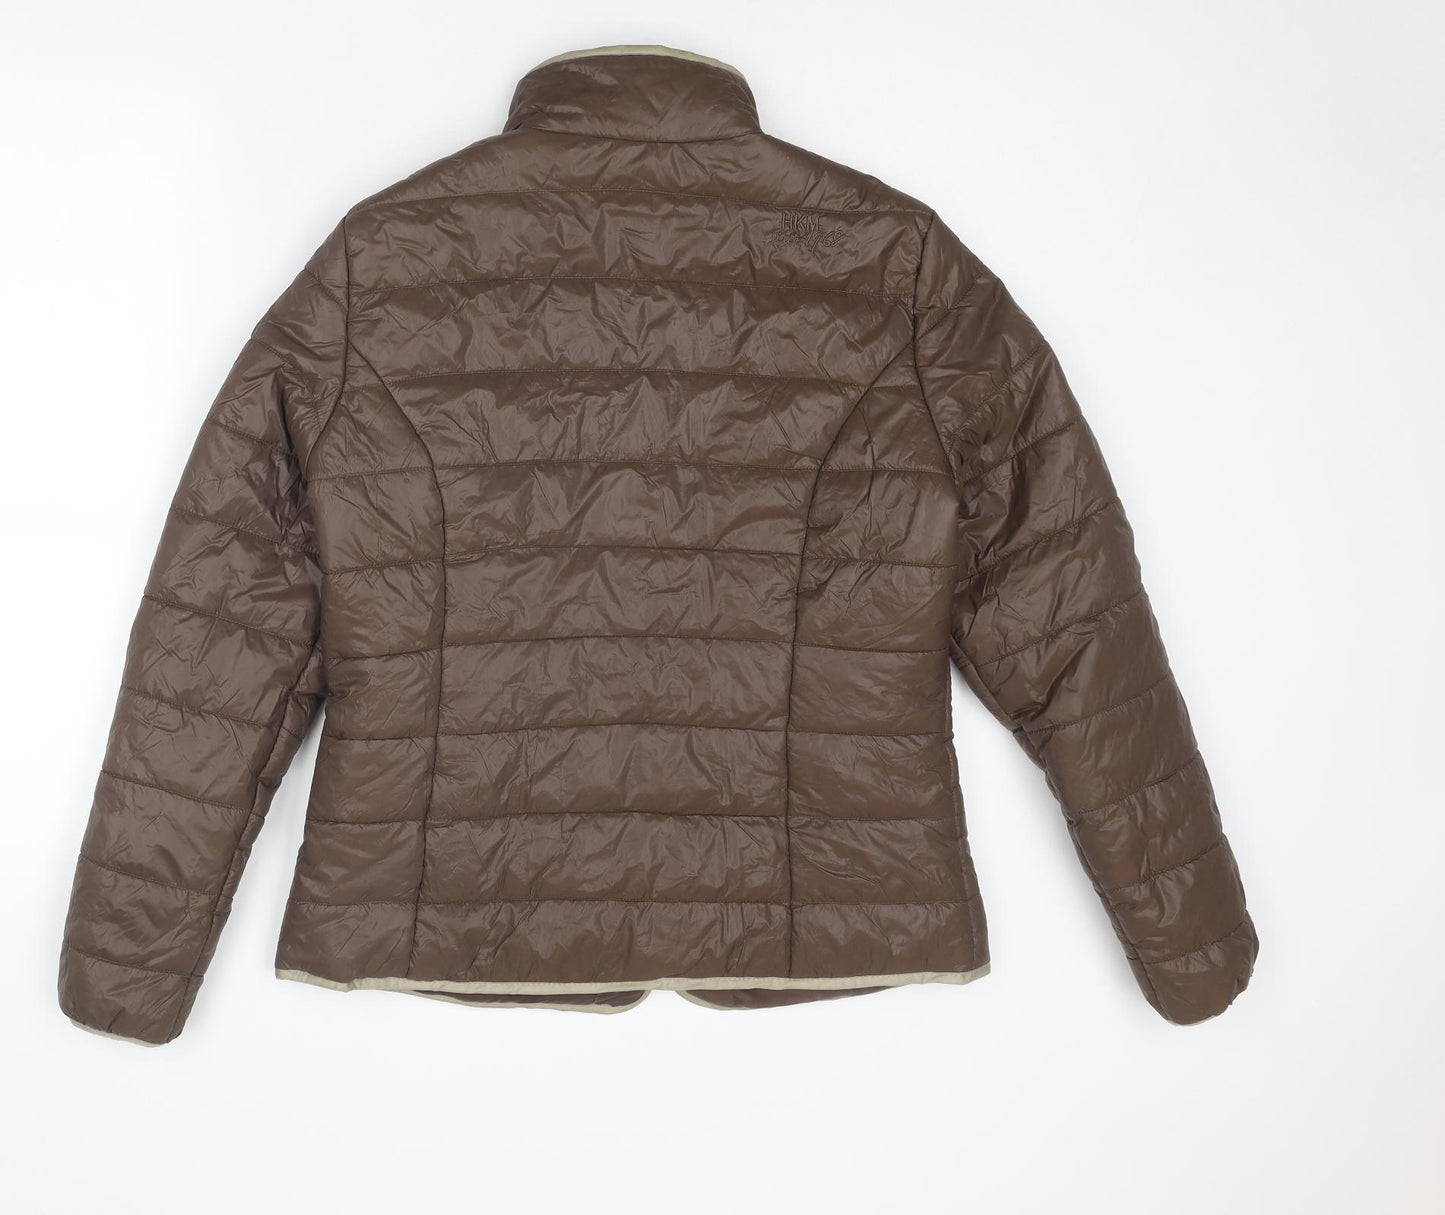 HKM Sports Womens Brown Quilted Jacket Size M Zip